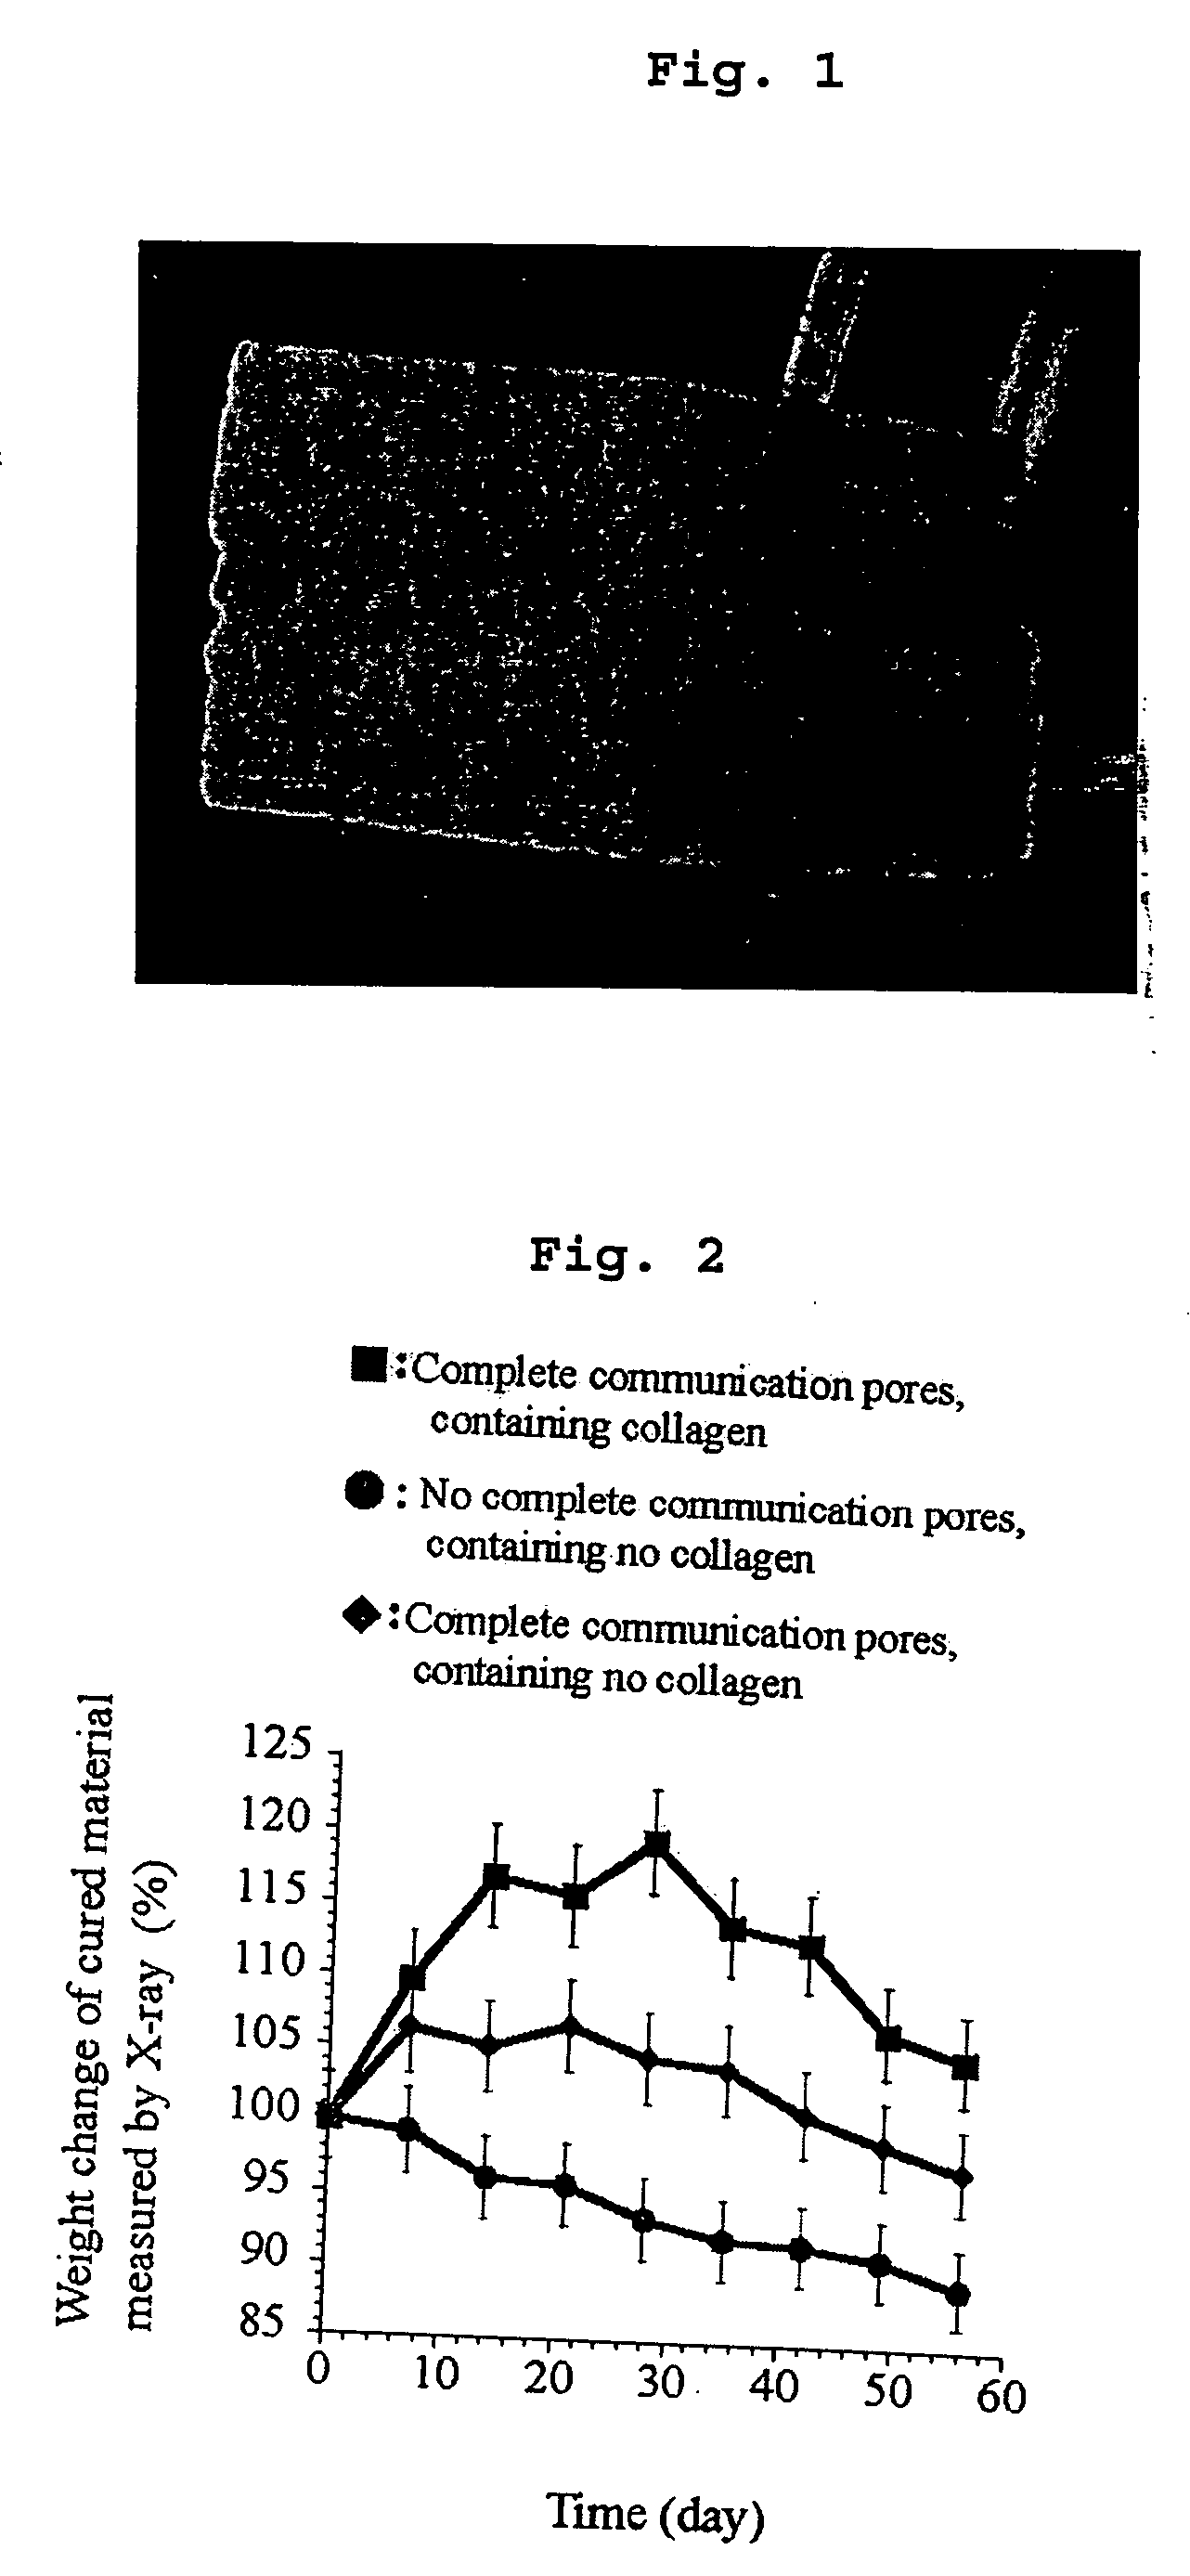 Cured porous calcium phosphate material and uses thereof